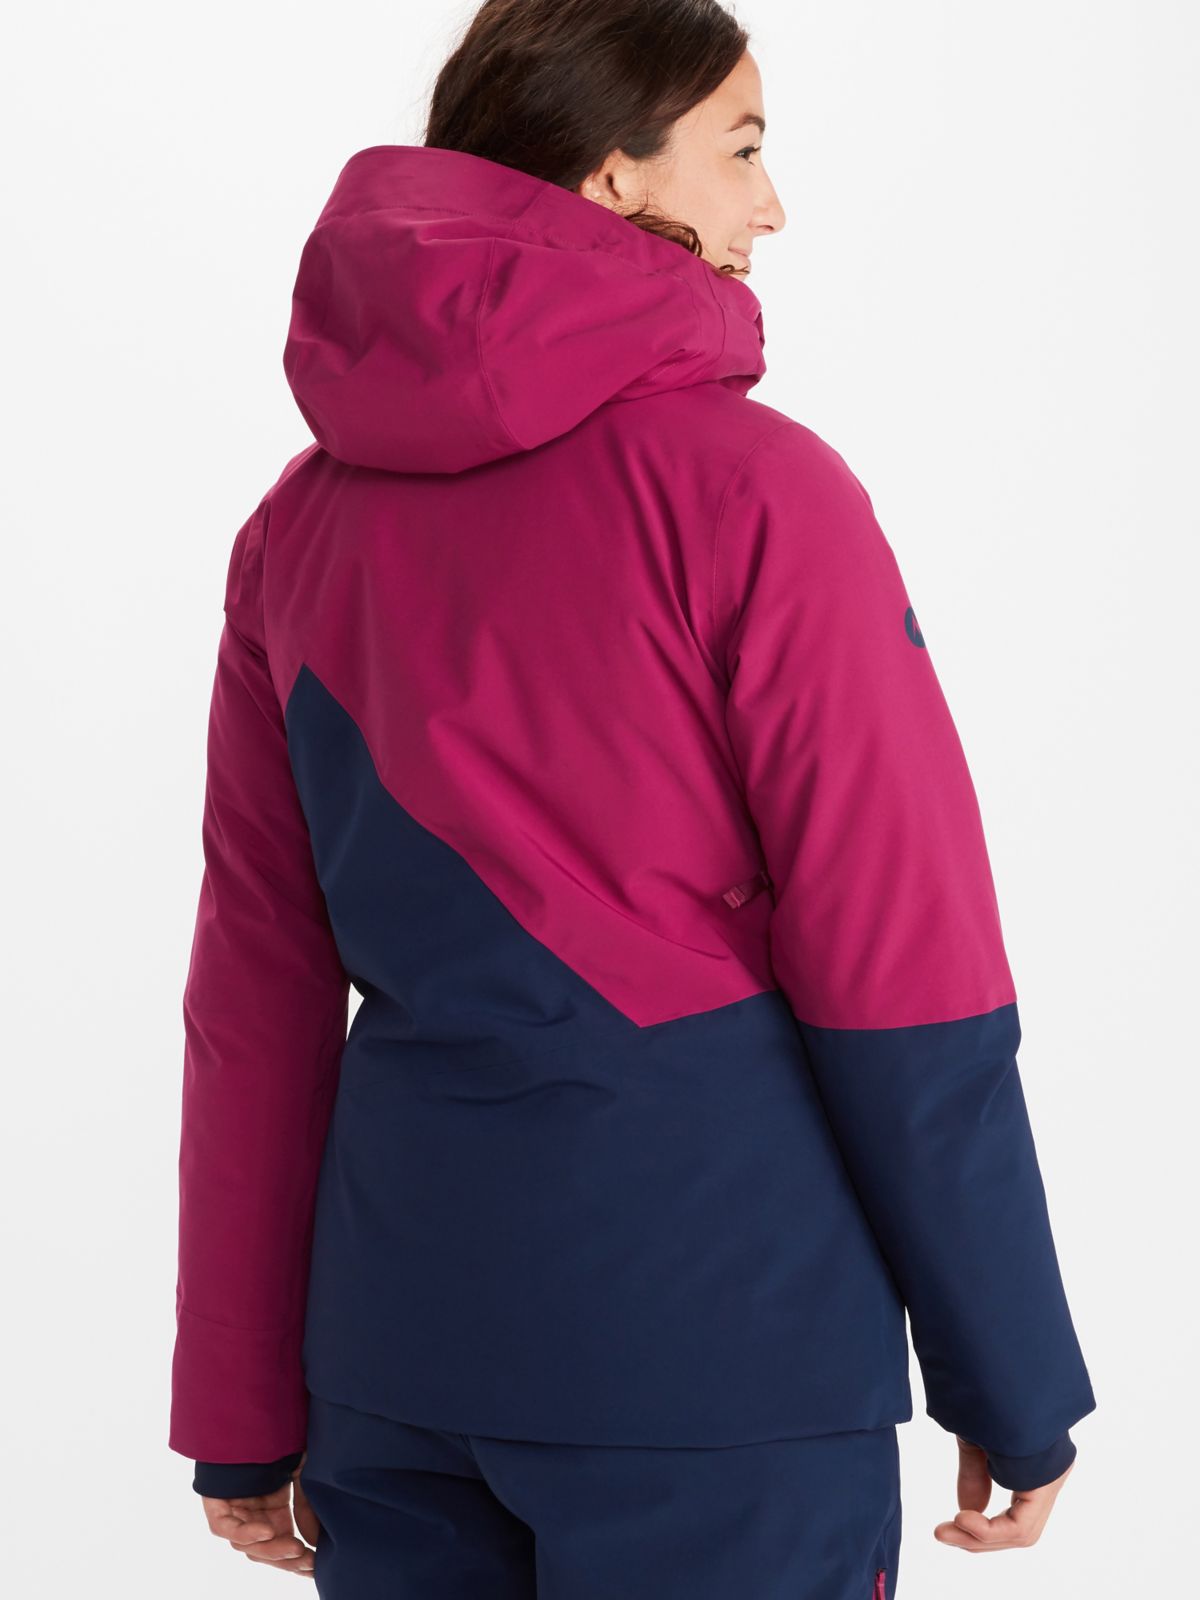 womens pace jacket